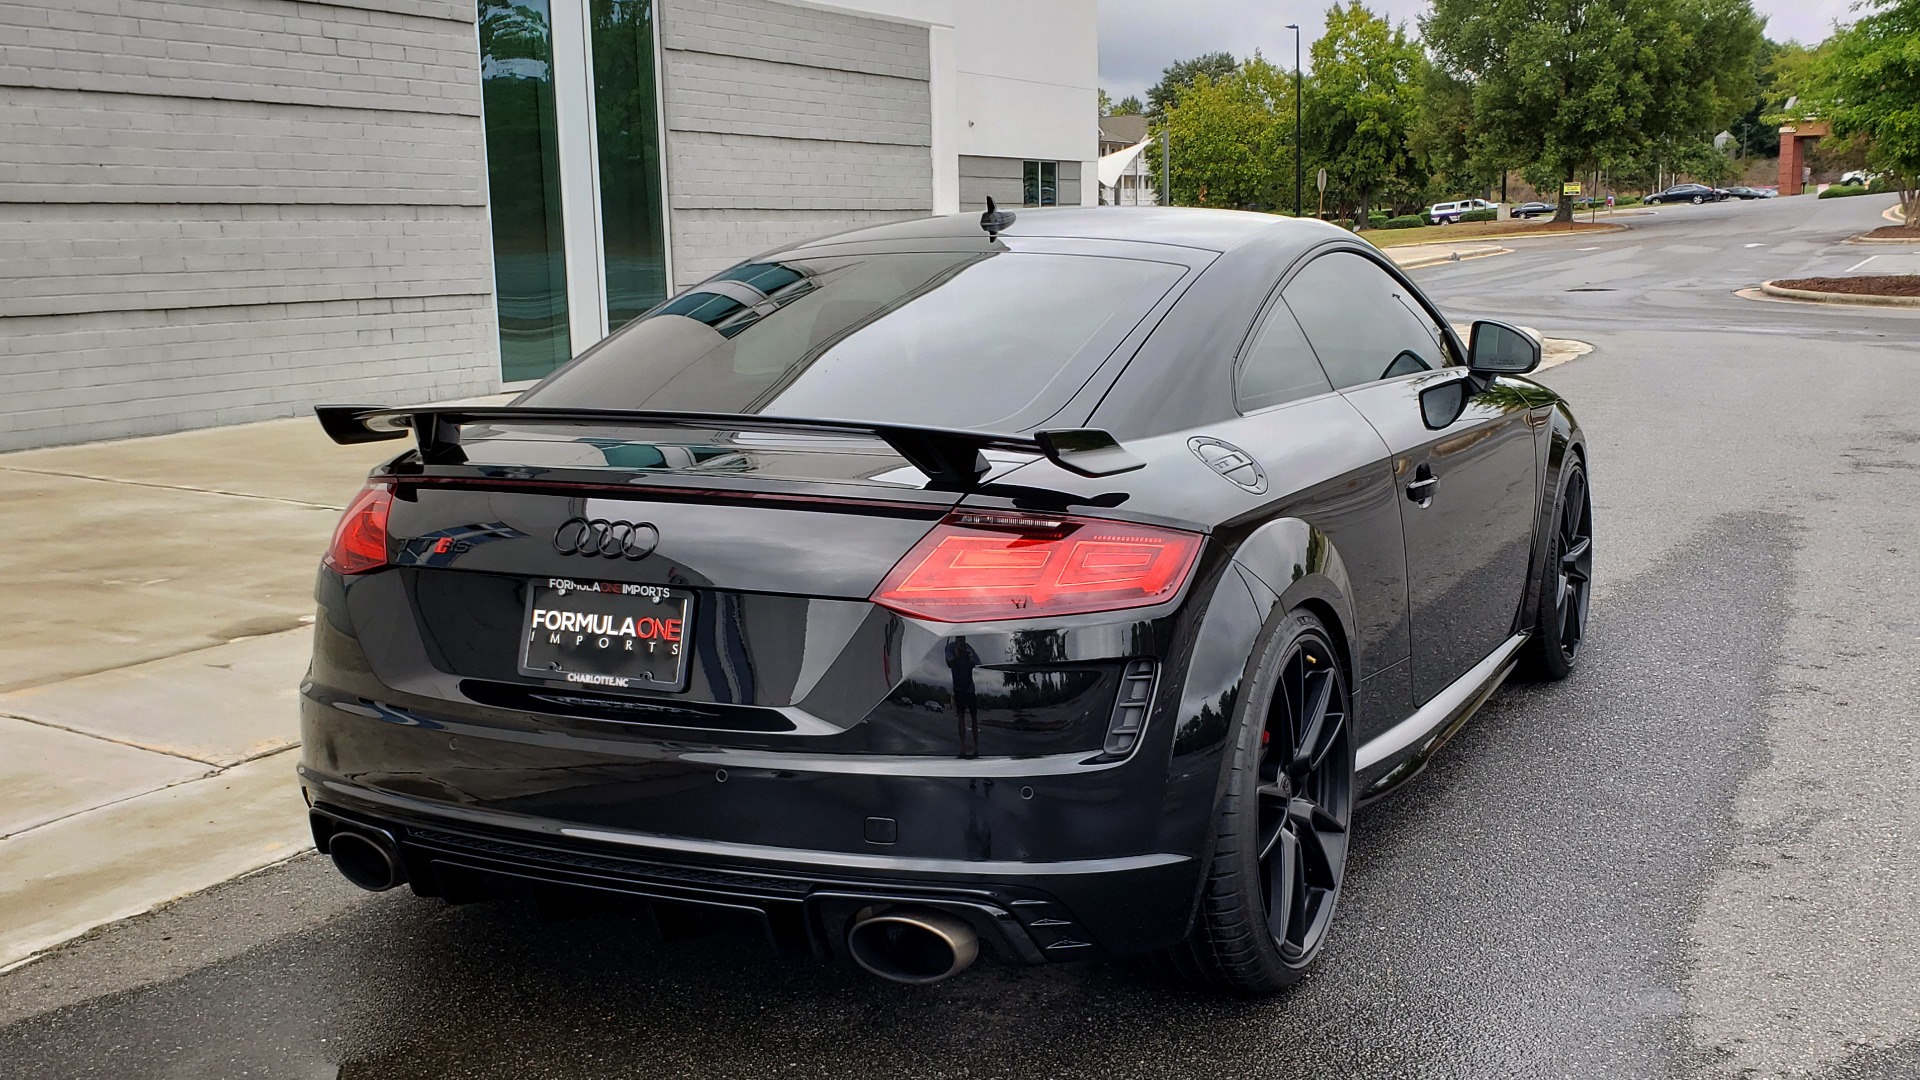 Used 2019 Audi TT RS 2.5L / QUATTRO / RS DESIGN / TECH / DYNAMIC / BLACK OPTIC / CARB for sale Sold at Formula Imports in Charlotte NC 28227 3